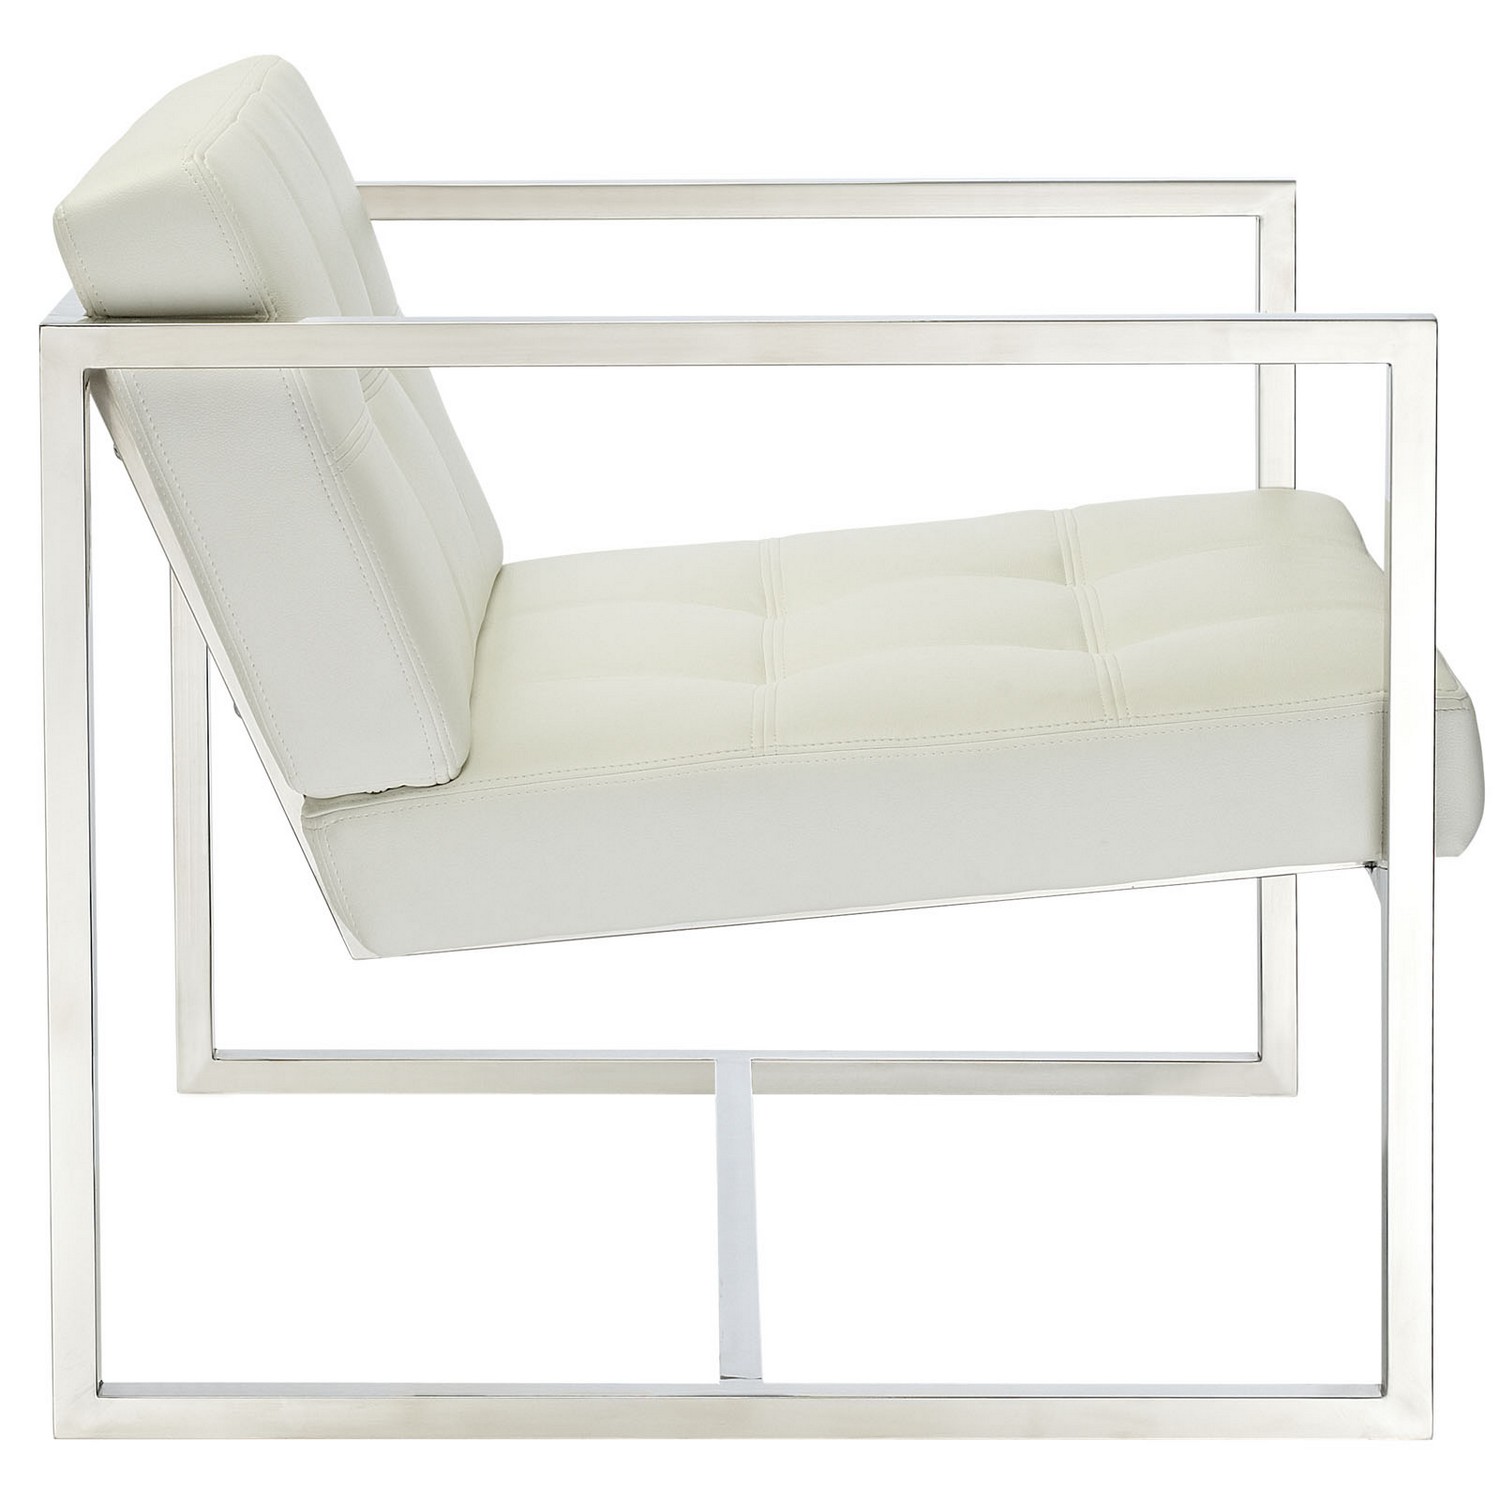 Modway Hover Lounge Chair - White